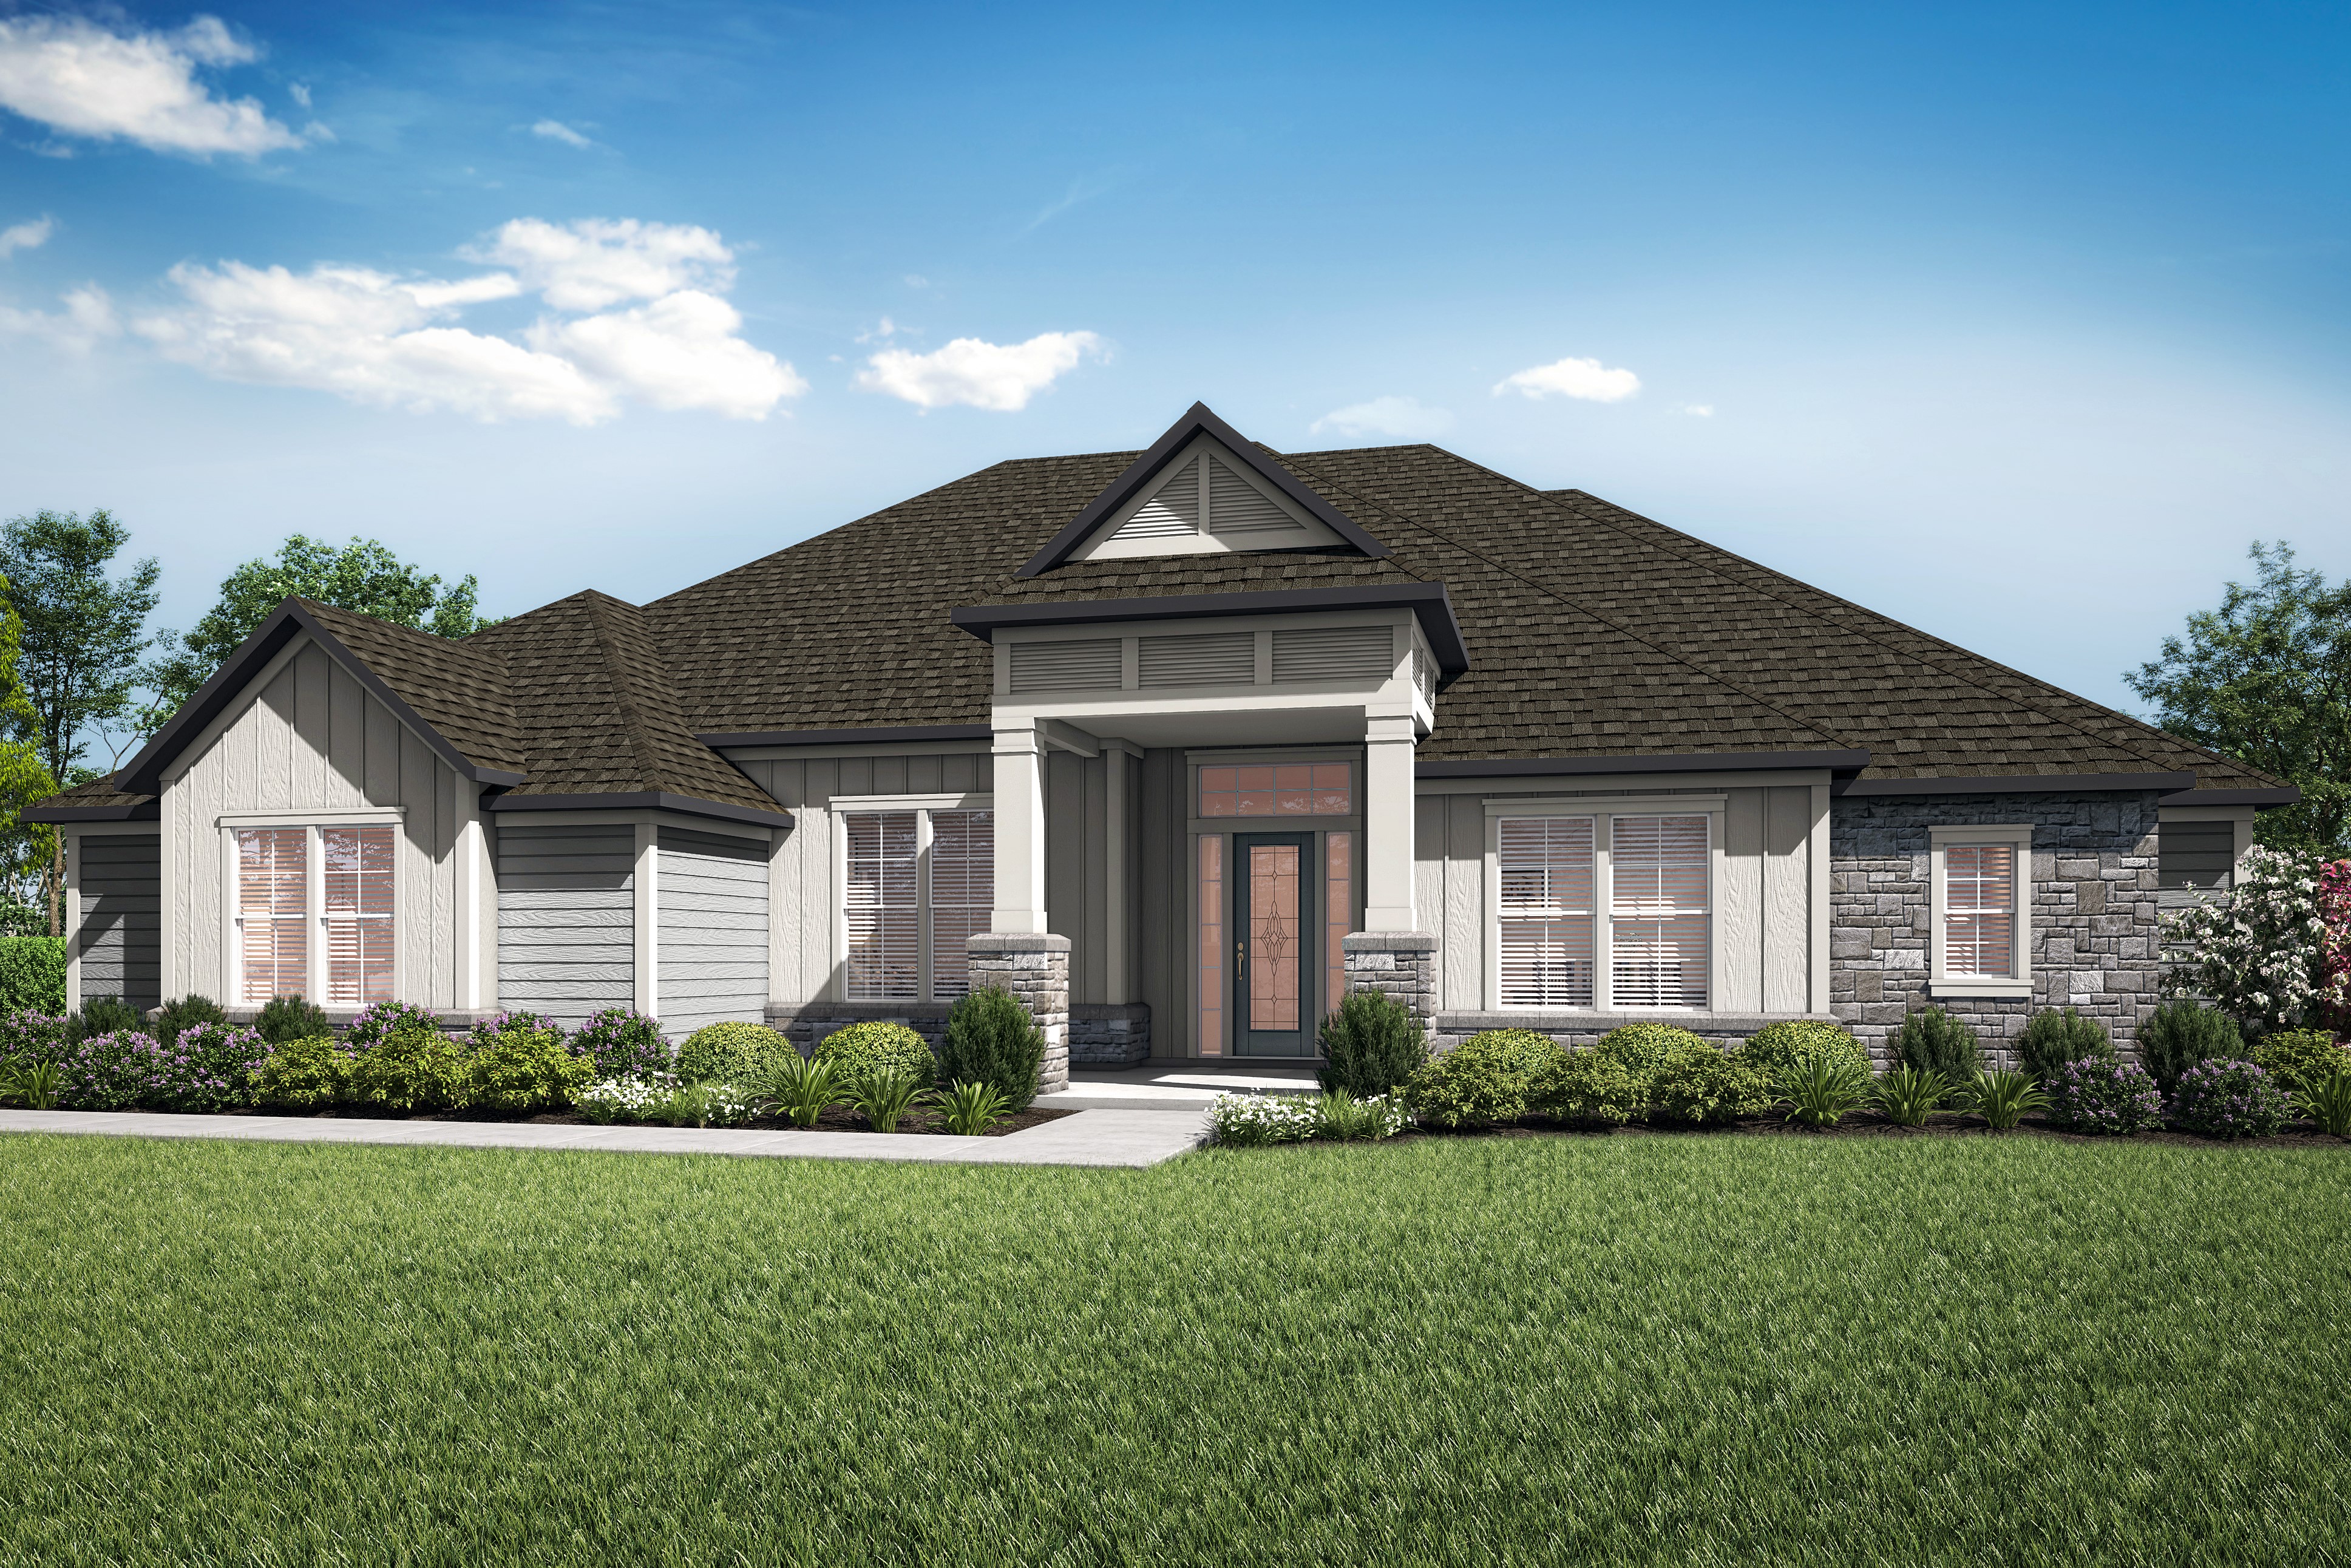 The Timberland plan is a stunning, two-story home offered at Southern Pines.